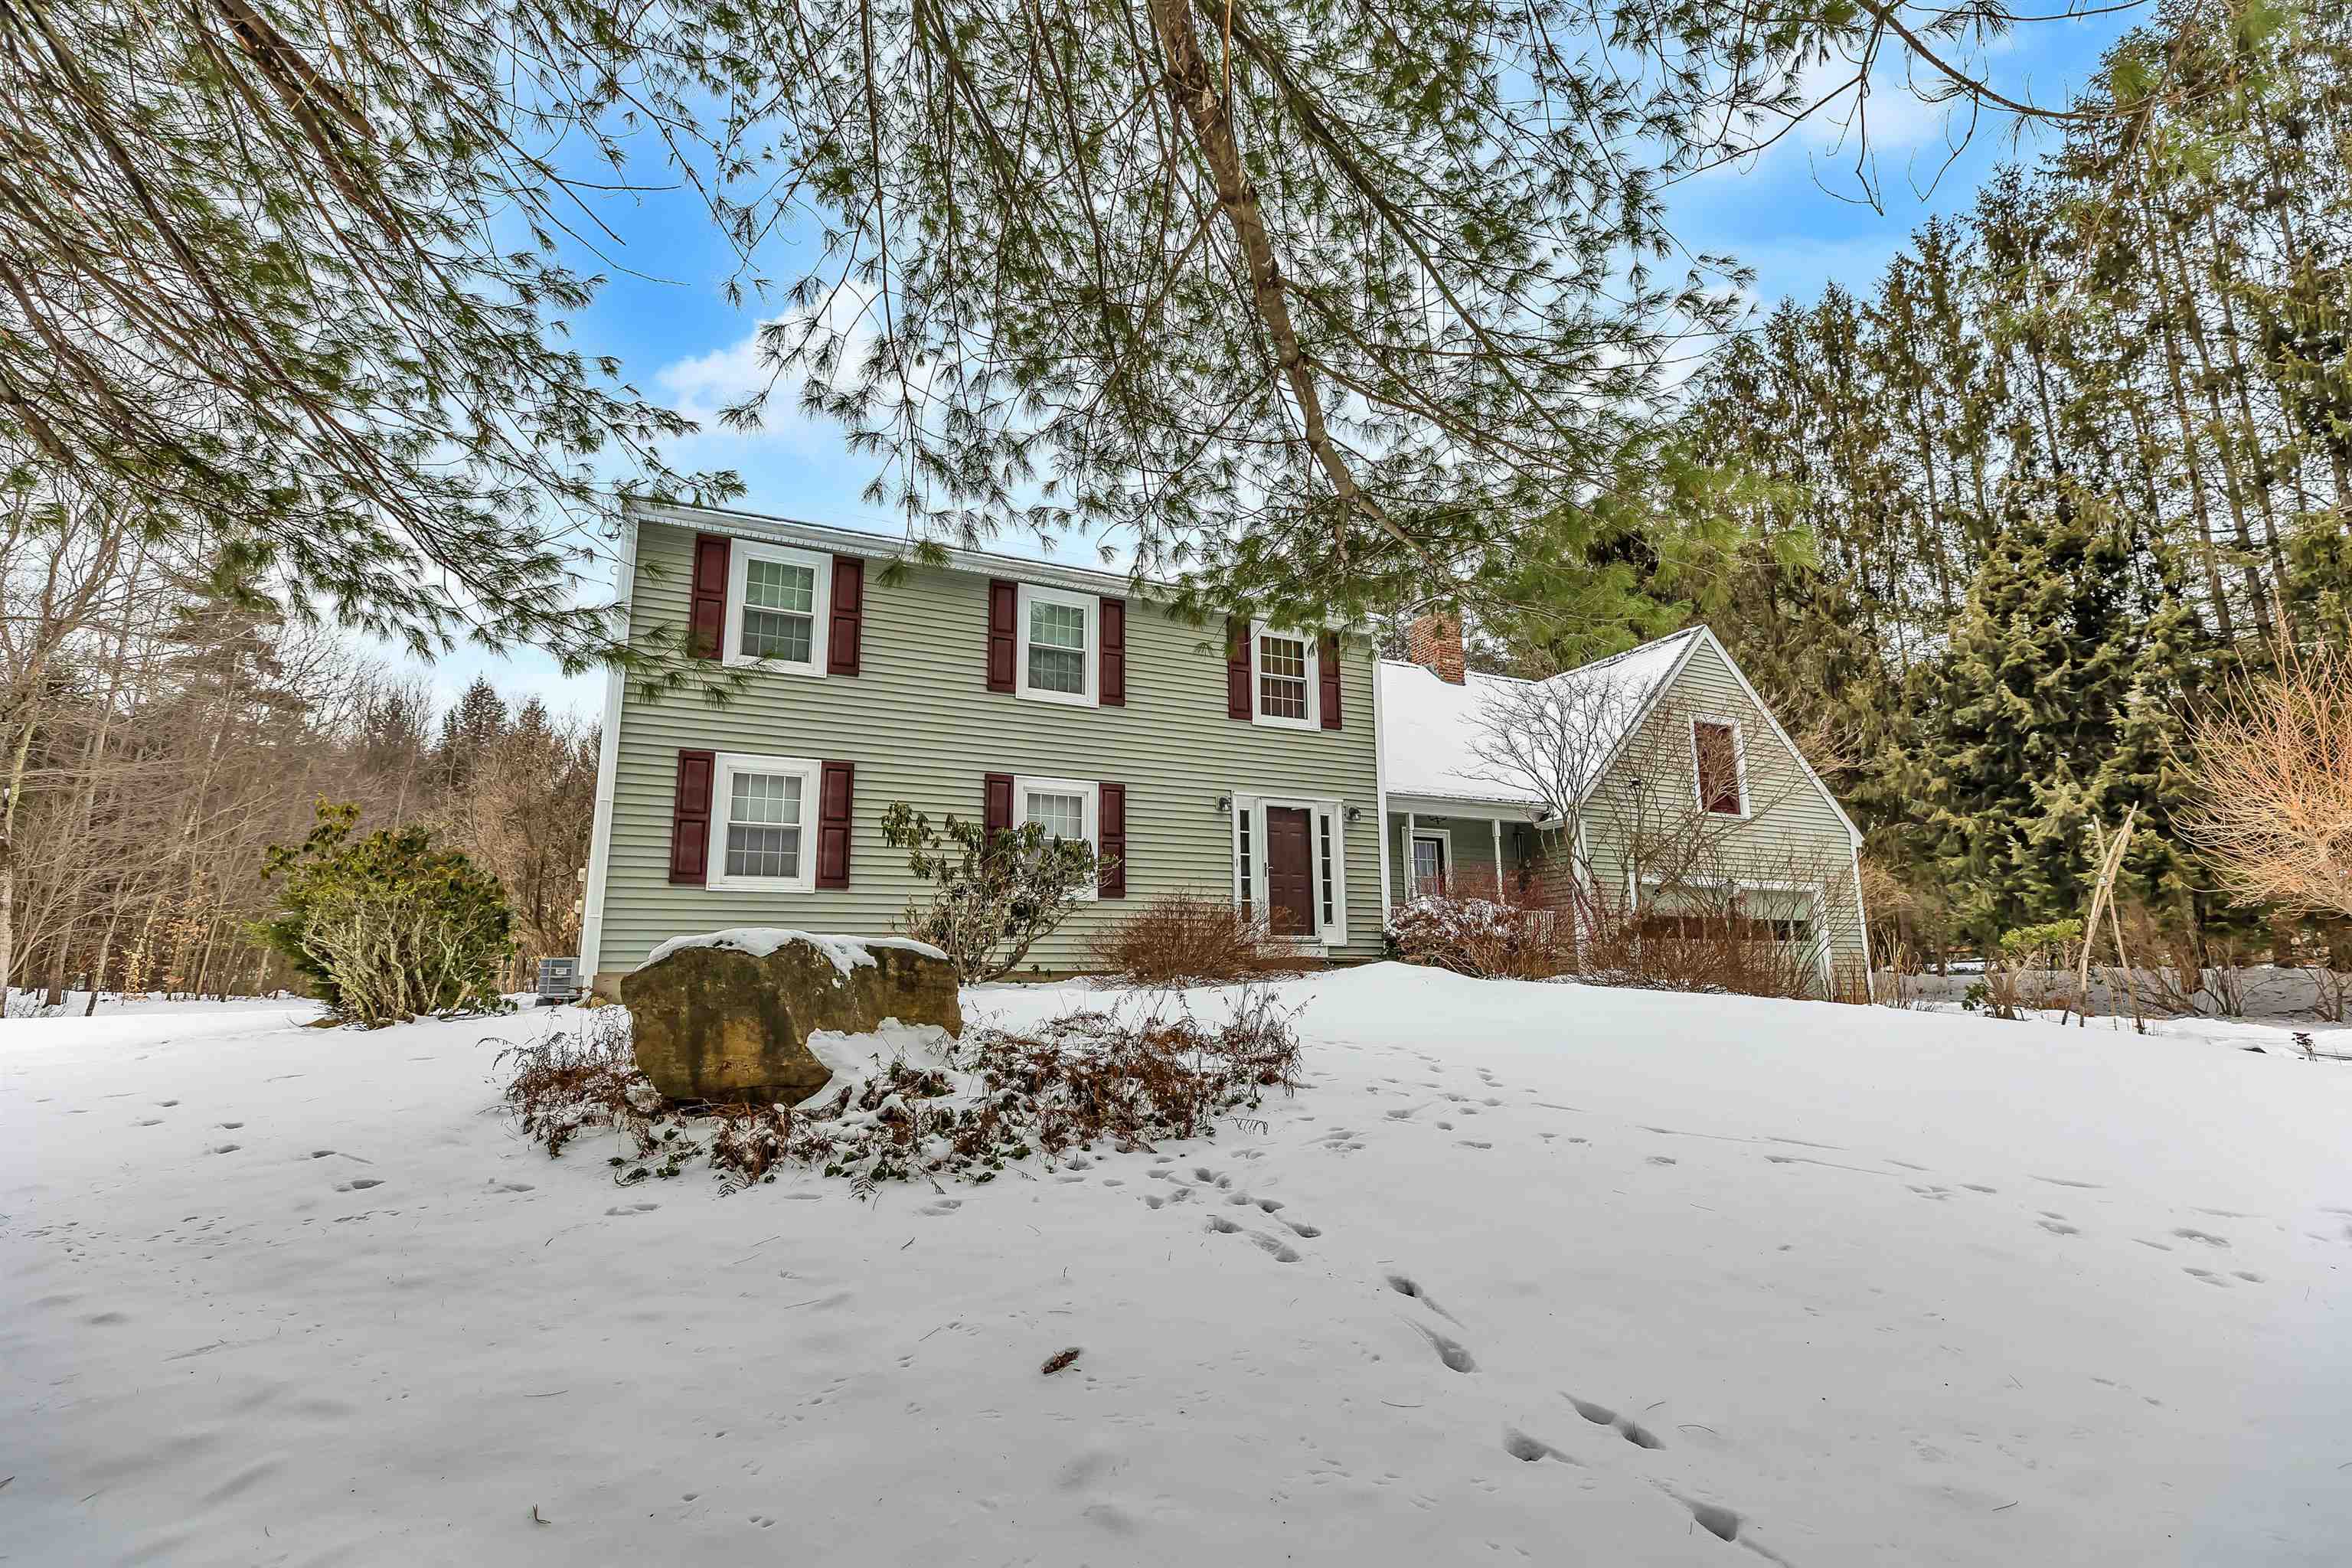 44 Horace Greeley Road Amherst, NH Photo